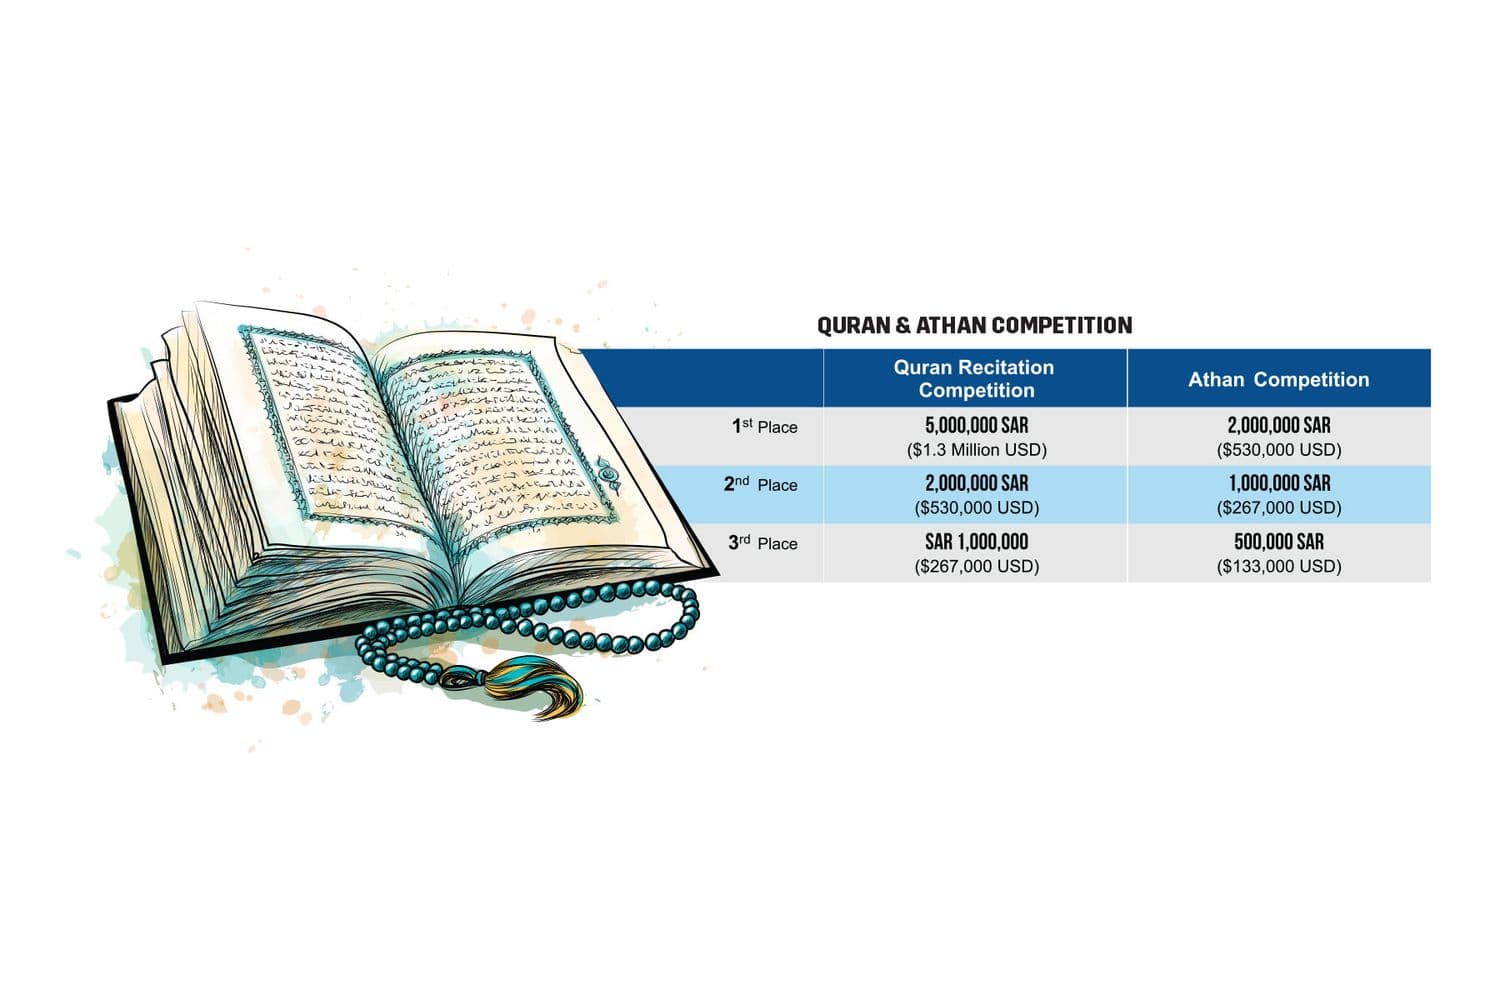 Quran & Athan Competition